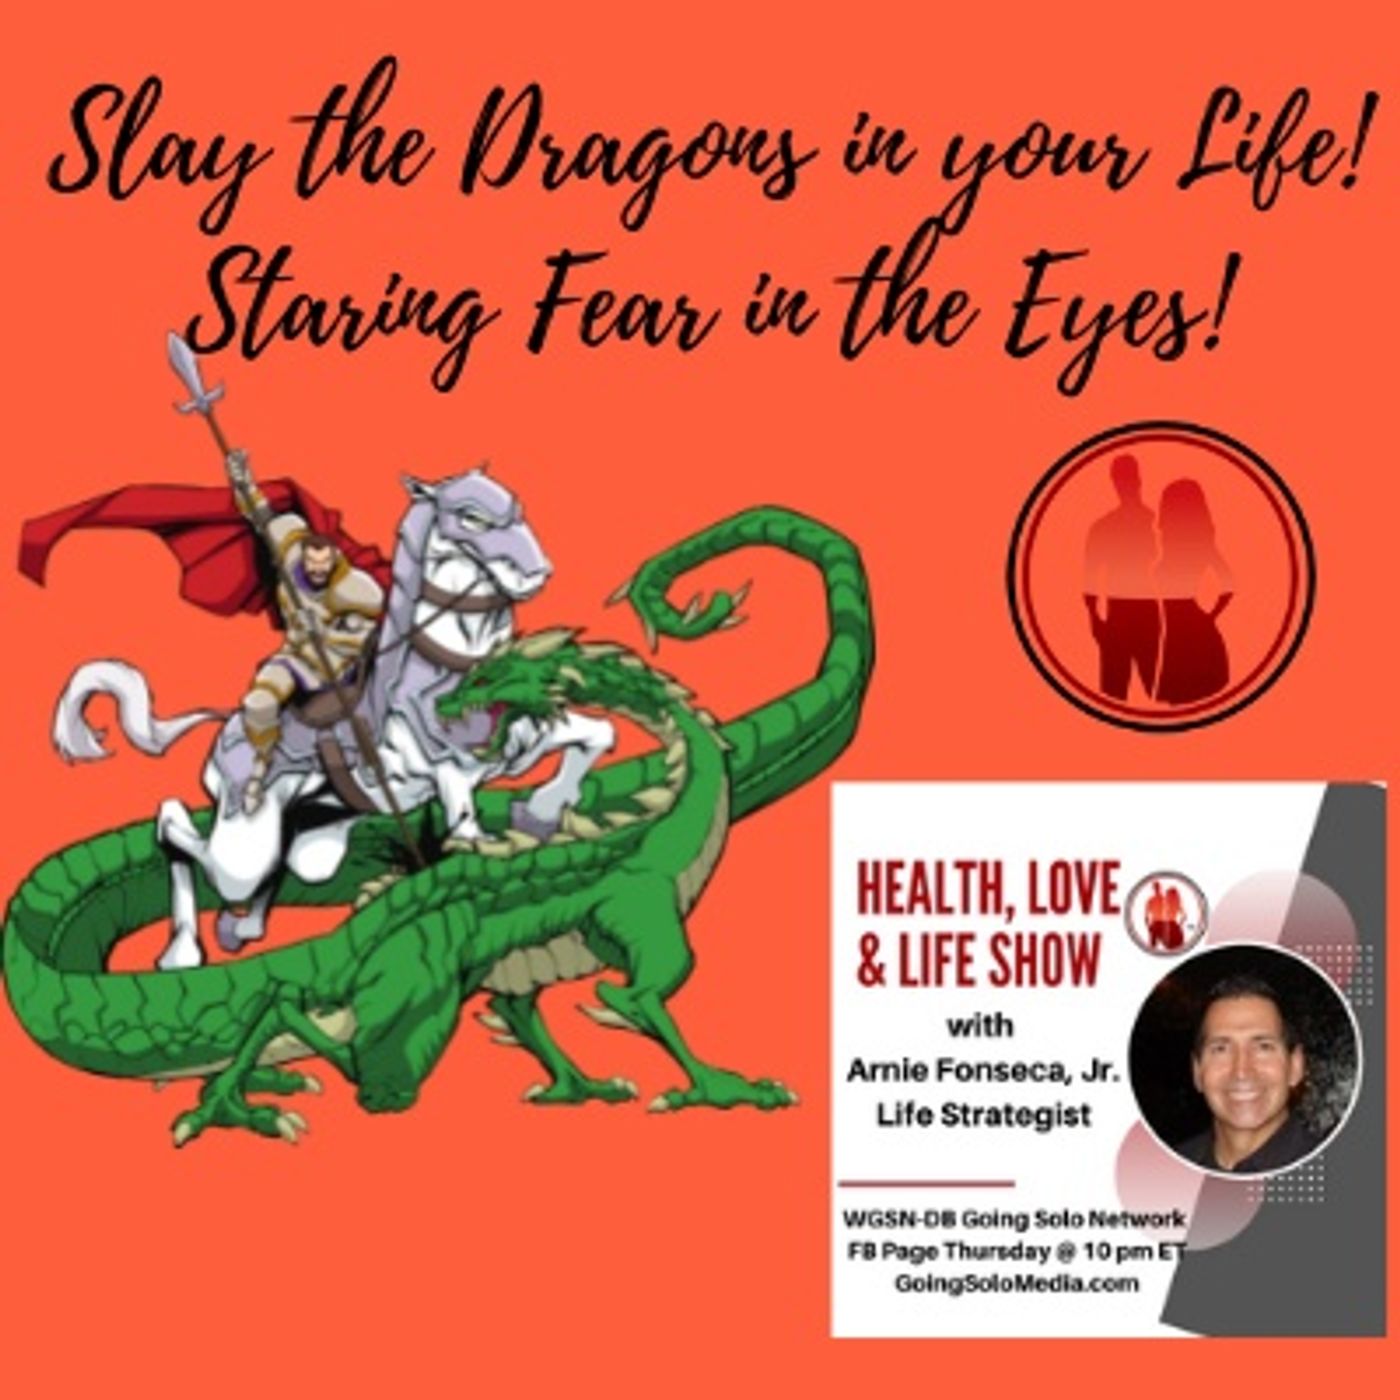 Slay the Dragons in your Life! Staring Fear in the Eyes!